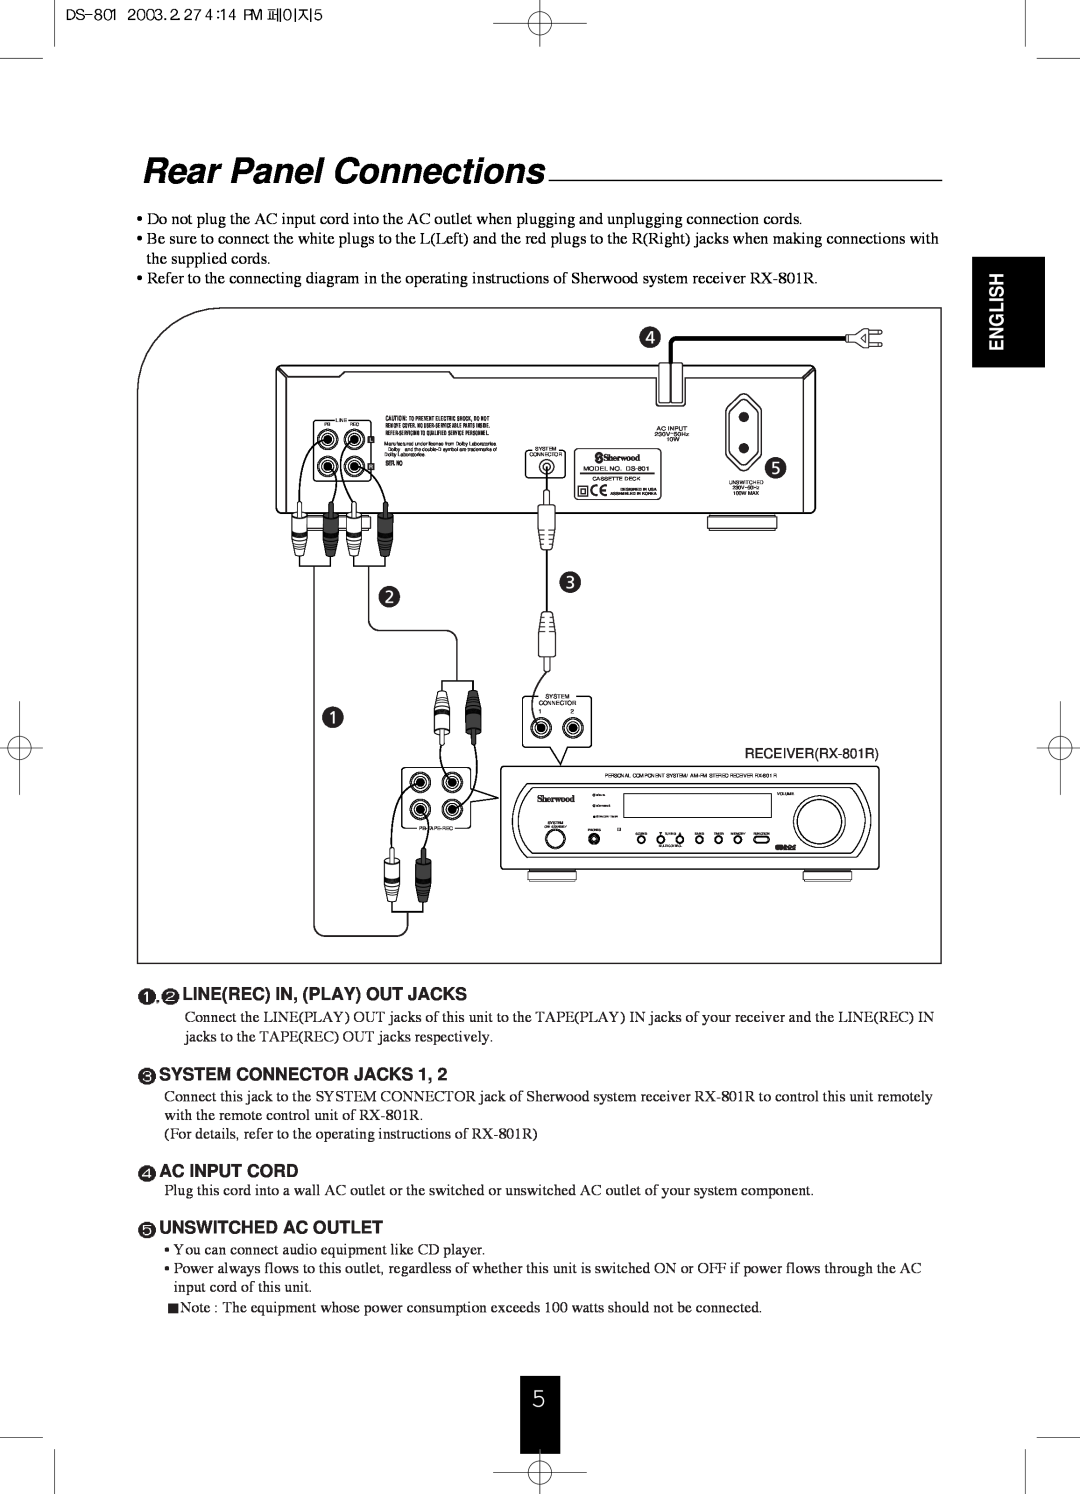 Sherwood DS-801 manual Rear Panel Connections, Linerec In, Play Out Jacks, System Connector Jacks, Ac Input Cord, English 